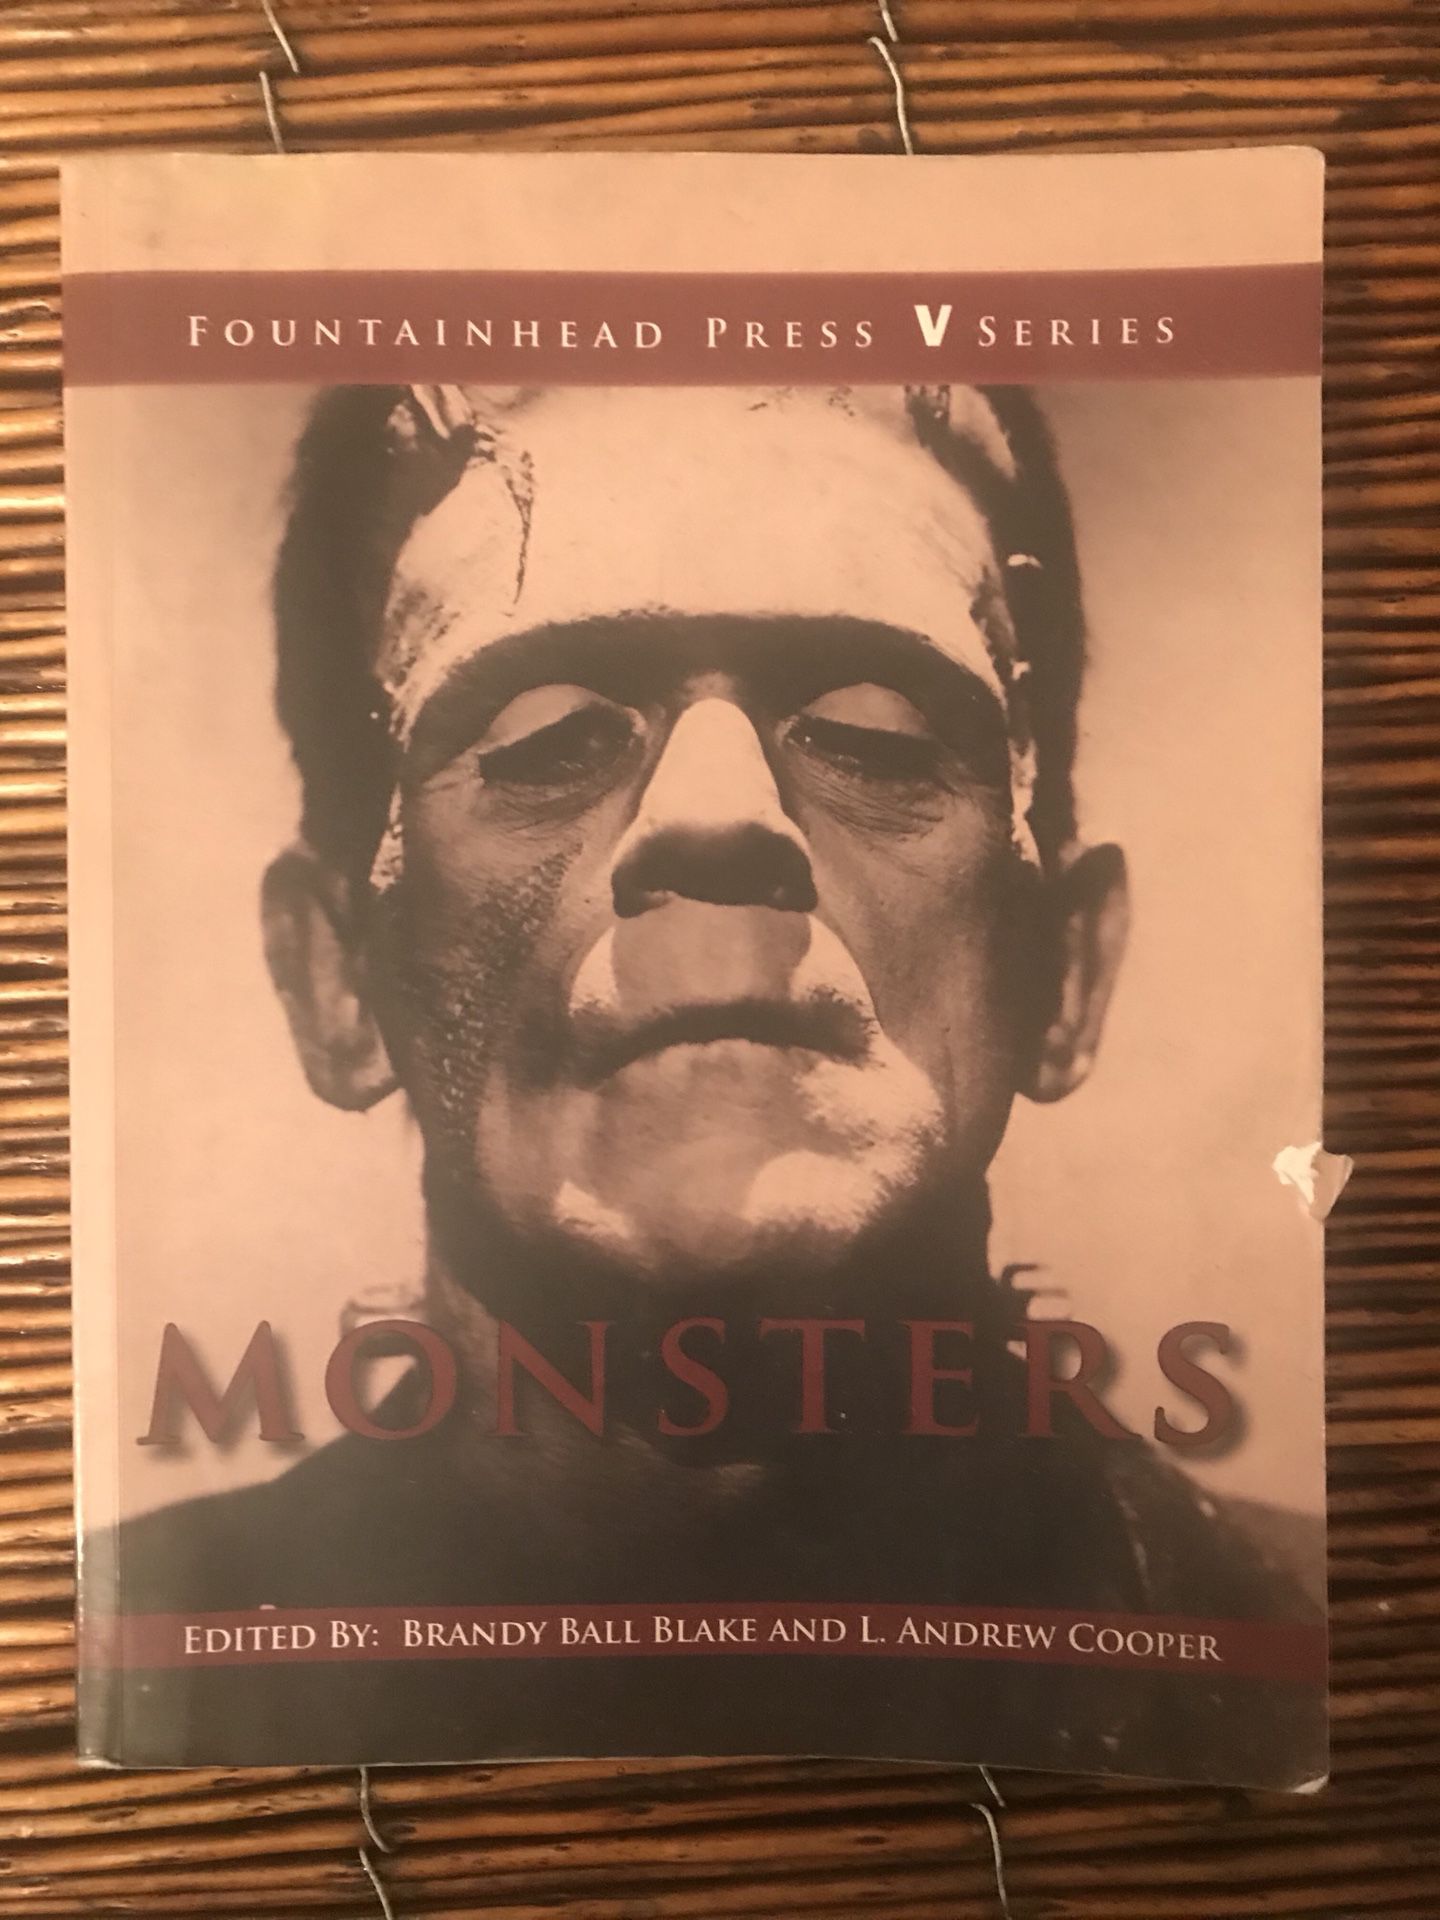 CSN ENG 101 | Monsters edited by Brandy Ball Blake and L Andrew Cooper